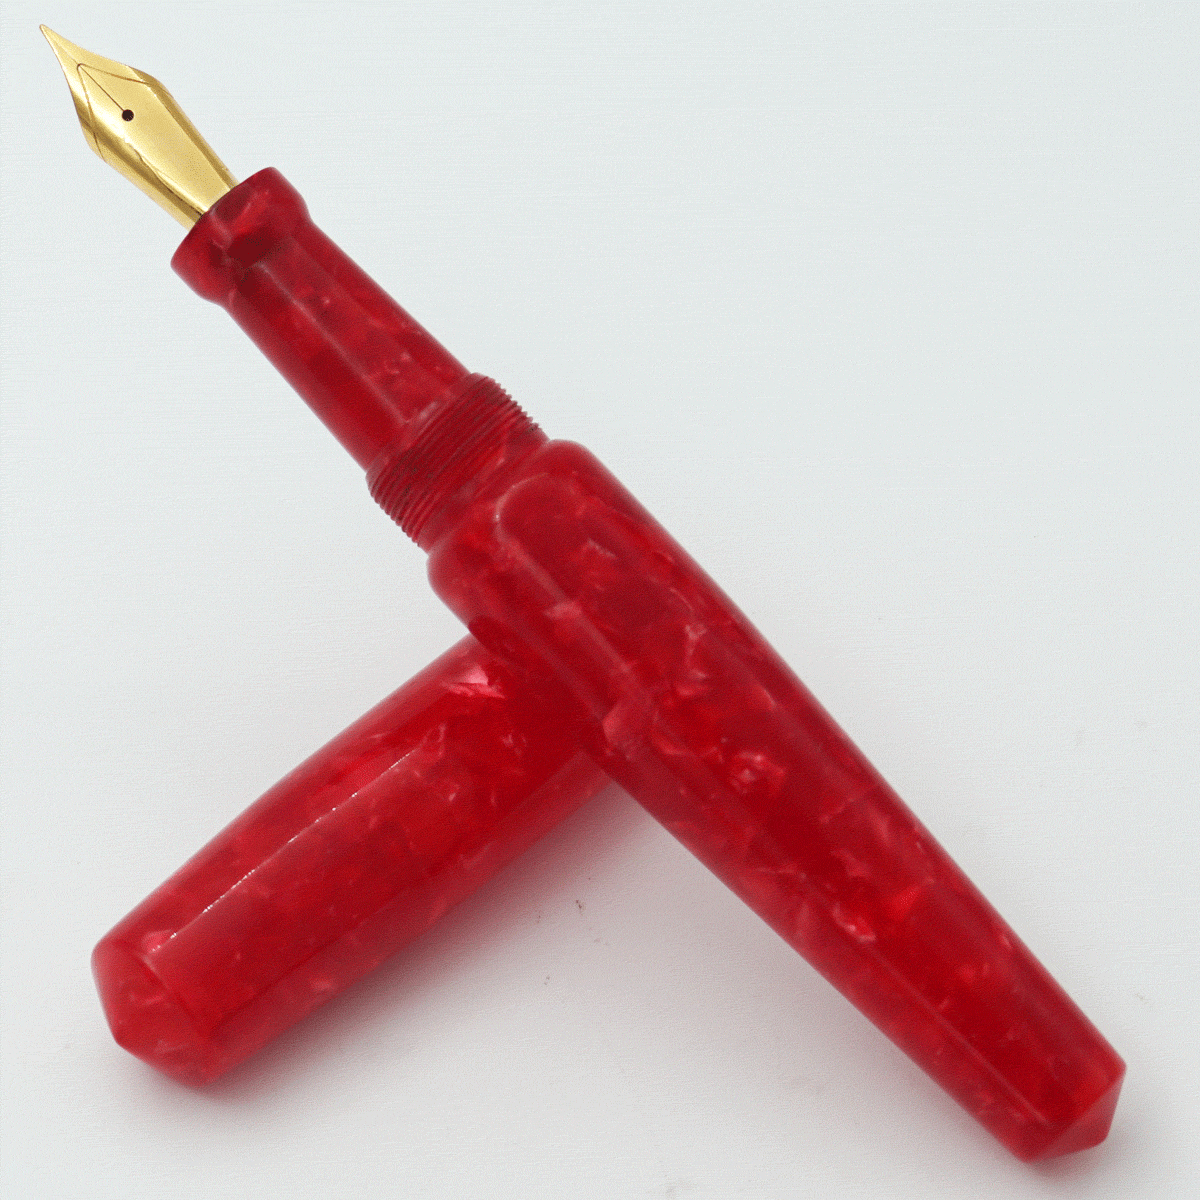 Ranga Handmade Abhimanyu Grand Model Premium Acrylic P11 Red on Red Cracked Ice Color Body And Without Clip German Jowo Nib Converter Type Fountain Pen (Nib Can be Customized With Fine or Medium or Broad) SKU 24276